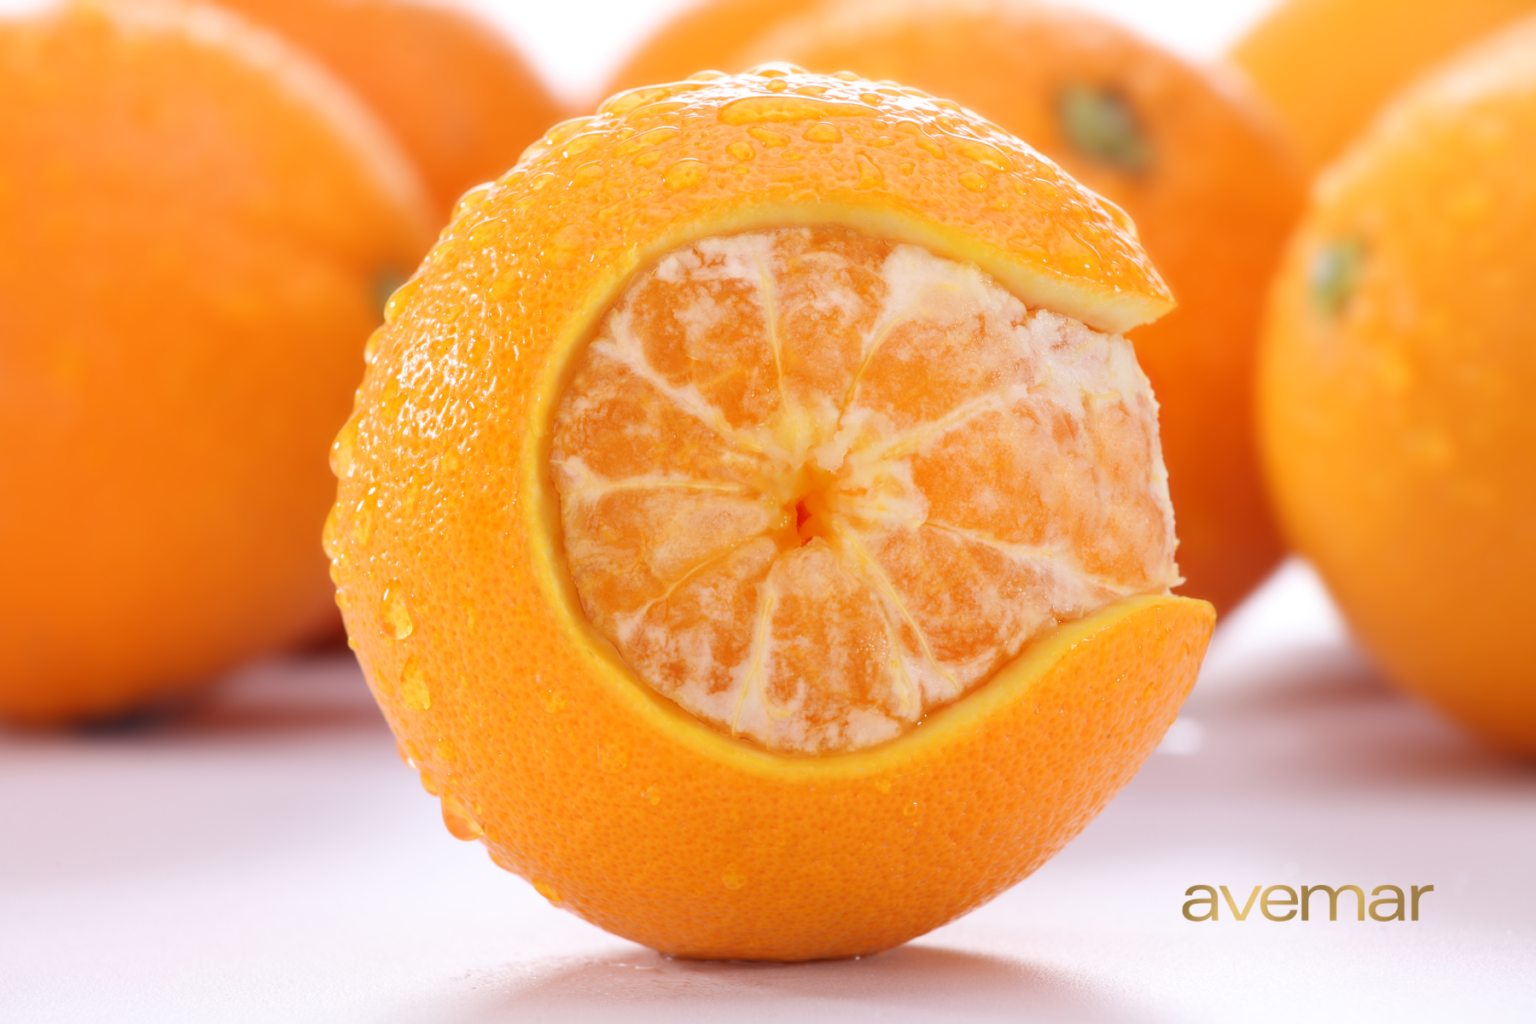 CAN VITAMIN C BE TAKEN WITH AVEMAR?